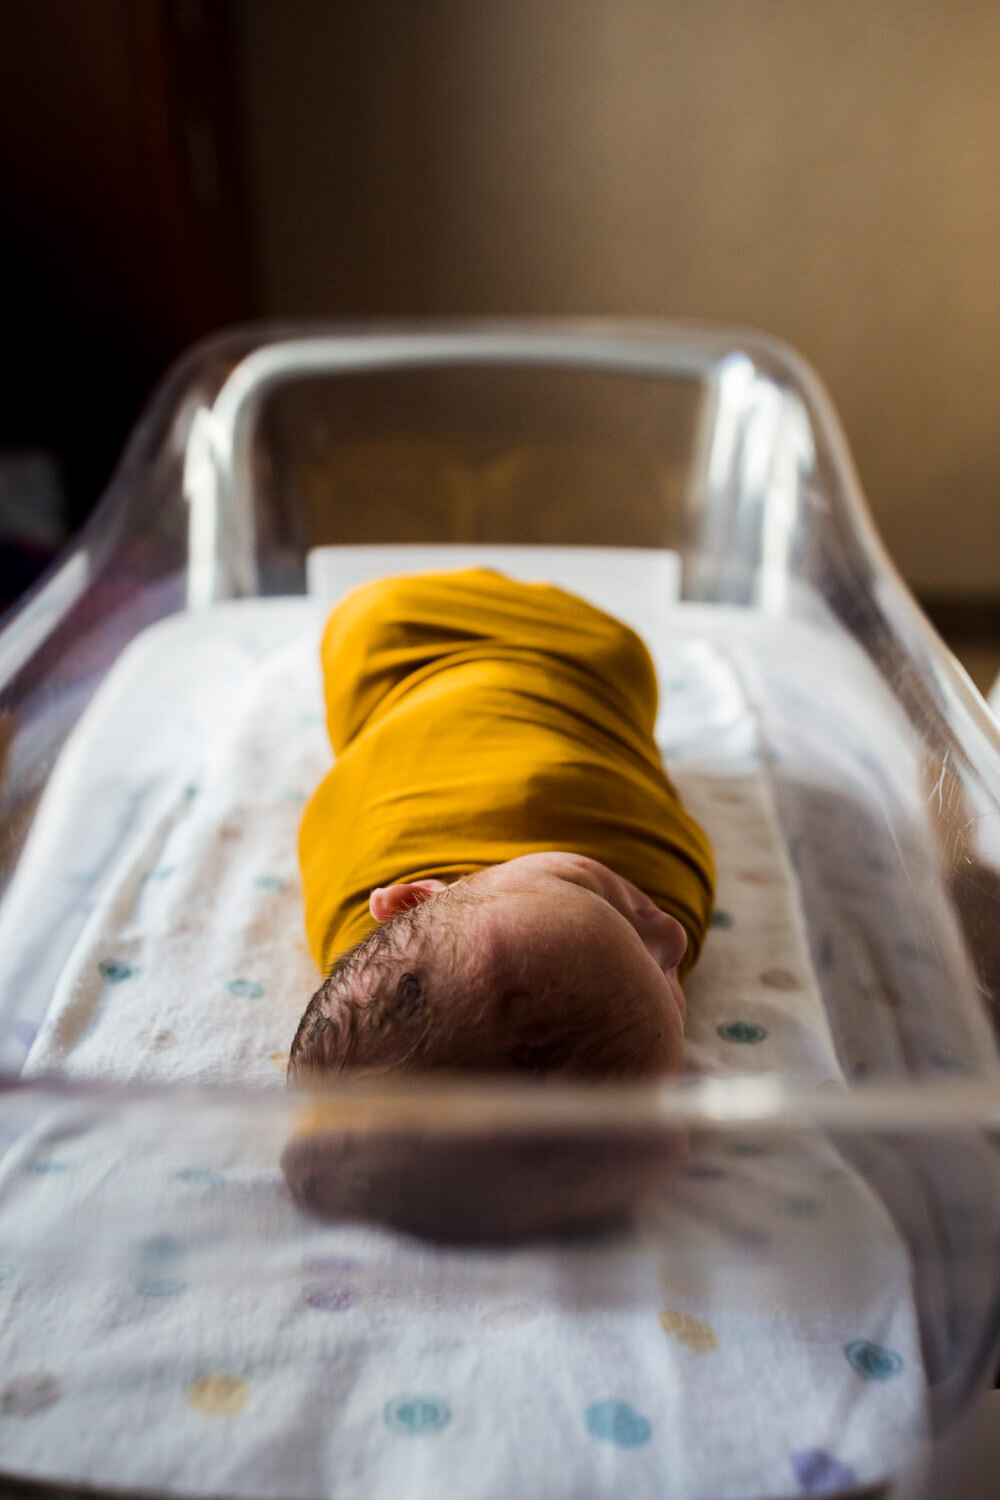 fresh 48 baby in yellow swaddle in hospital bassinet